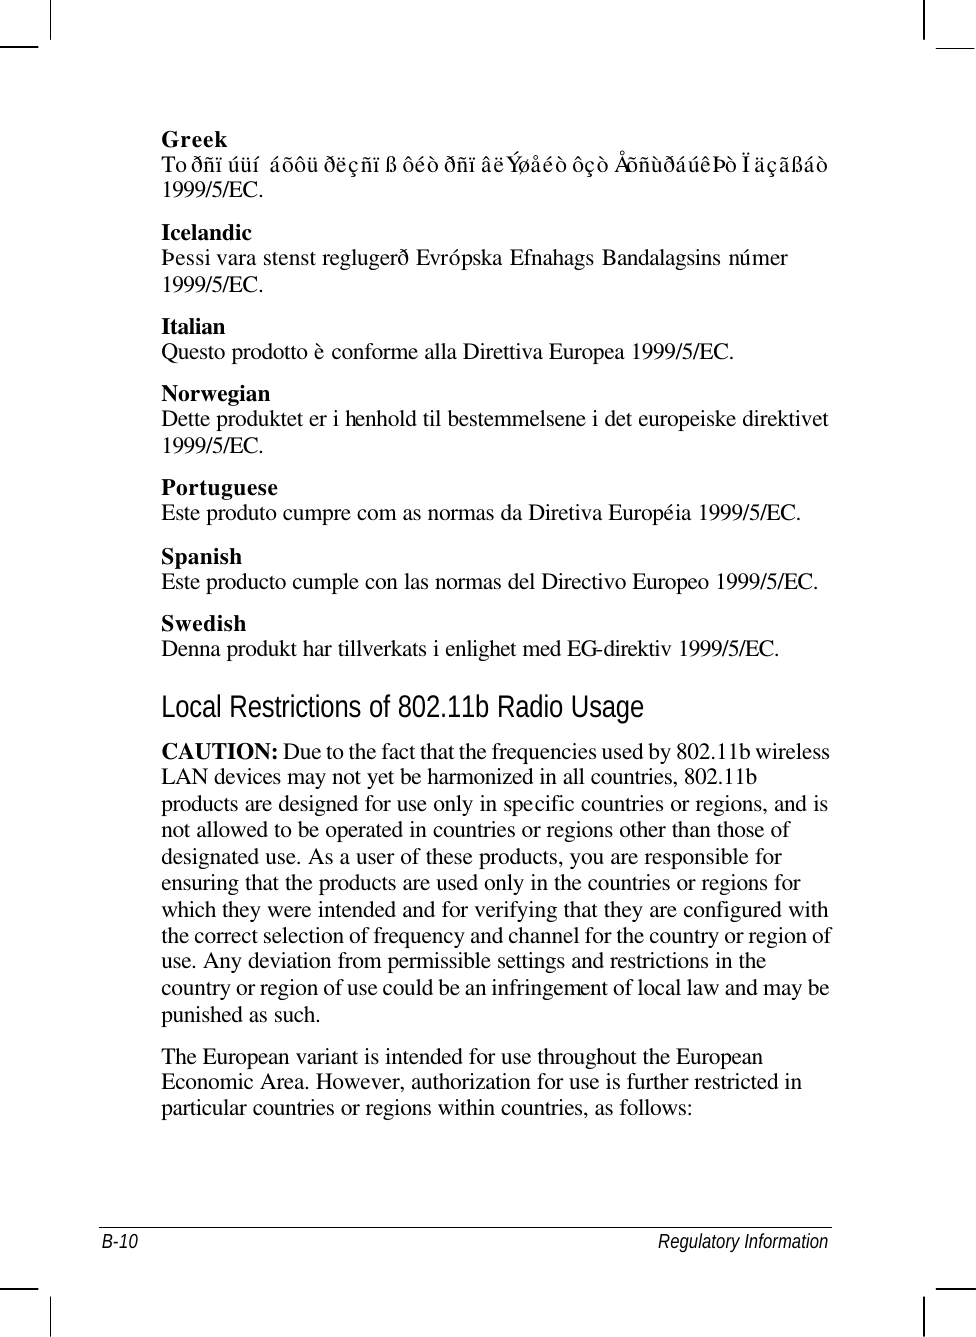  B-10 Regulatory Information Greek To ðñïúüí áõôü ðëçñïß ôéò ðñïâëÝøåéò ôçò ÅõñùðáúêÞò Ïäçãßáò 1999/5/EC. Icelandic Þessi vara stenst reglugerð Evrópska Efnahags Bandalagsins númer 1999/5/EC. Italian Questo prodotto è conforme alla Direttiva Europea 1999/5/EC. Norwegian Dette produktet er i henhold til bestemmelsene i det europeiske direktivet 1999/5/EC. Portuguese Este produto cumpre com as normas da Diretiva Européia 1999/5/EC. Spanish Este producto cumple con las normas del Directivo Europeo 1999/5/EC. Swedish Denna produkt har tillverkats i enlighet med EG-direktiv 1999/5/EC. Local Restrictions of 802.11b Radio Usage CAUTION: Due to the fact that the frequencies used by 802.11b wireless LAN devices may not yet be harmonized in all countries, 802.11b products are designed for use only in specific countries or regions, and is not allowed to be operated in countries or regions other than those of designated use. As a user of these products, you are responsible for ensuring that the products are used only in the countries or regions for which they were intended and for verifying that they are configured with the correct selection of frequency and channel for the country or region of use. Any deviation from permissible settings and restrictions in the country or region of use could be an infringement of local law and may be punished as such. The European variant is intended for use throughout the European Economic Area. However, authorization for use is further restricted in particular countries or regions within countries, as follows: 